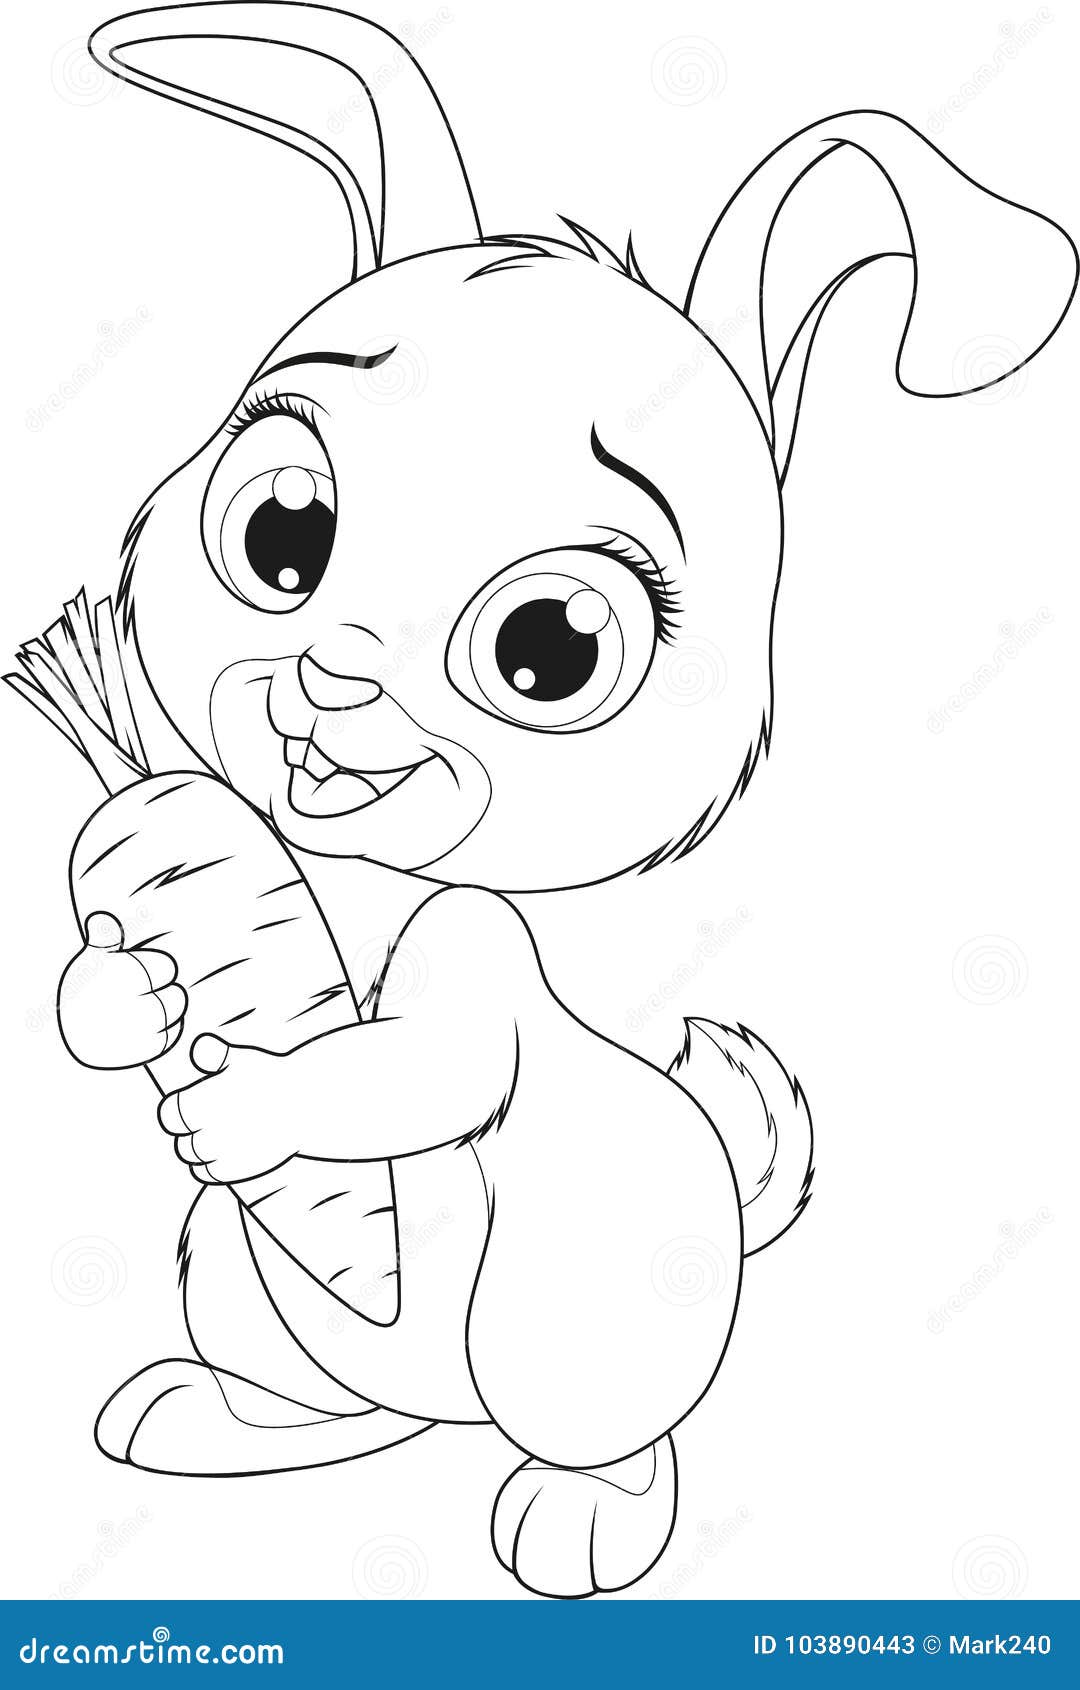 bunny funny coloring vector illustration